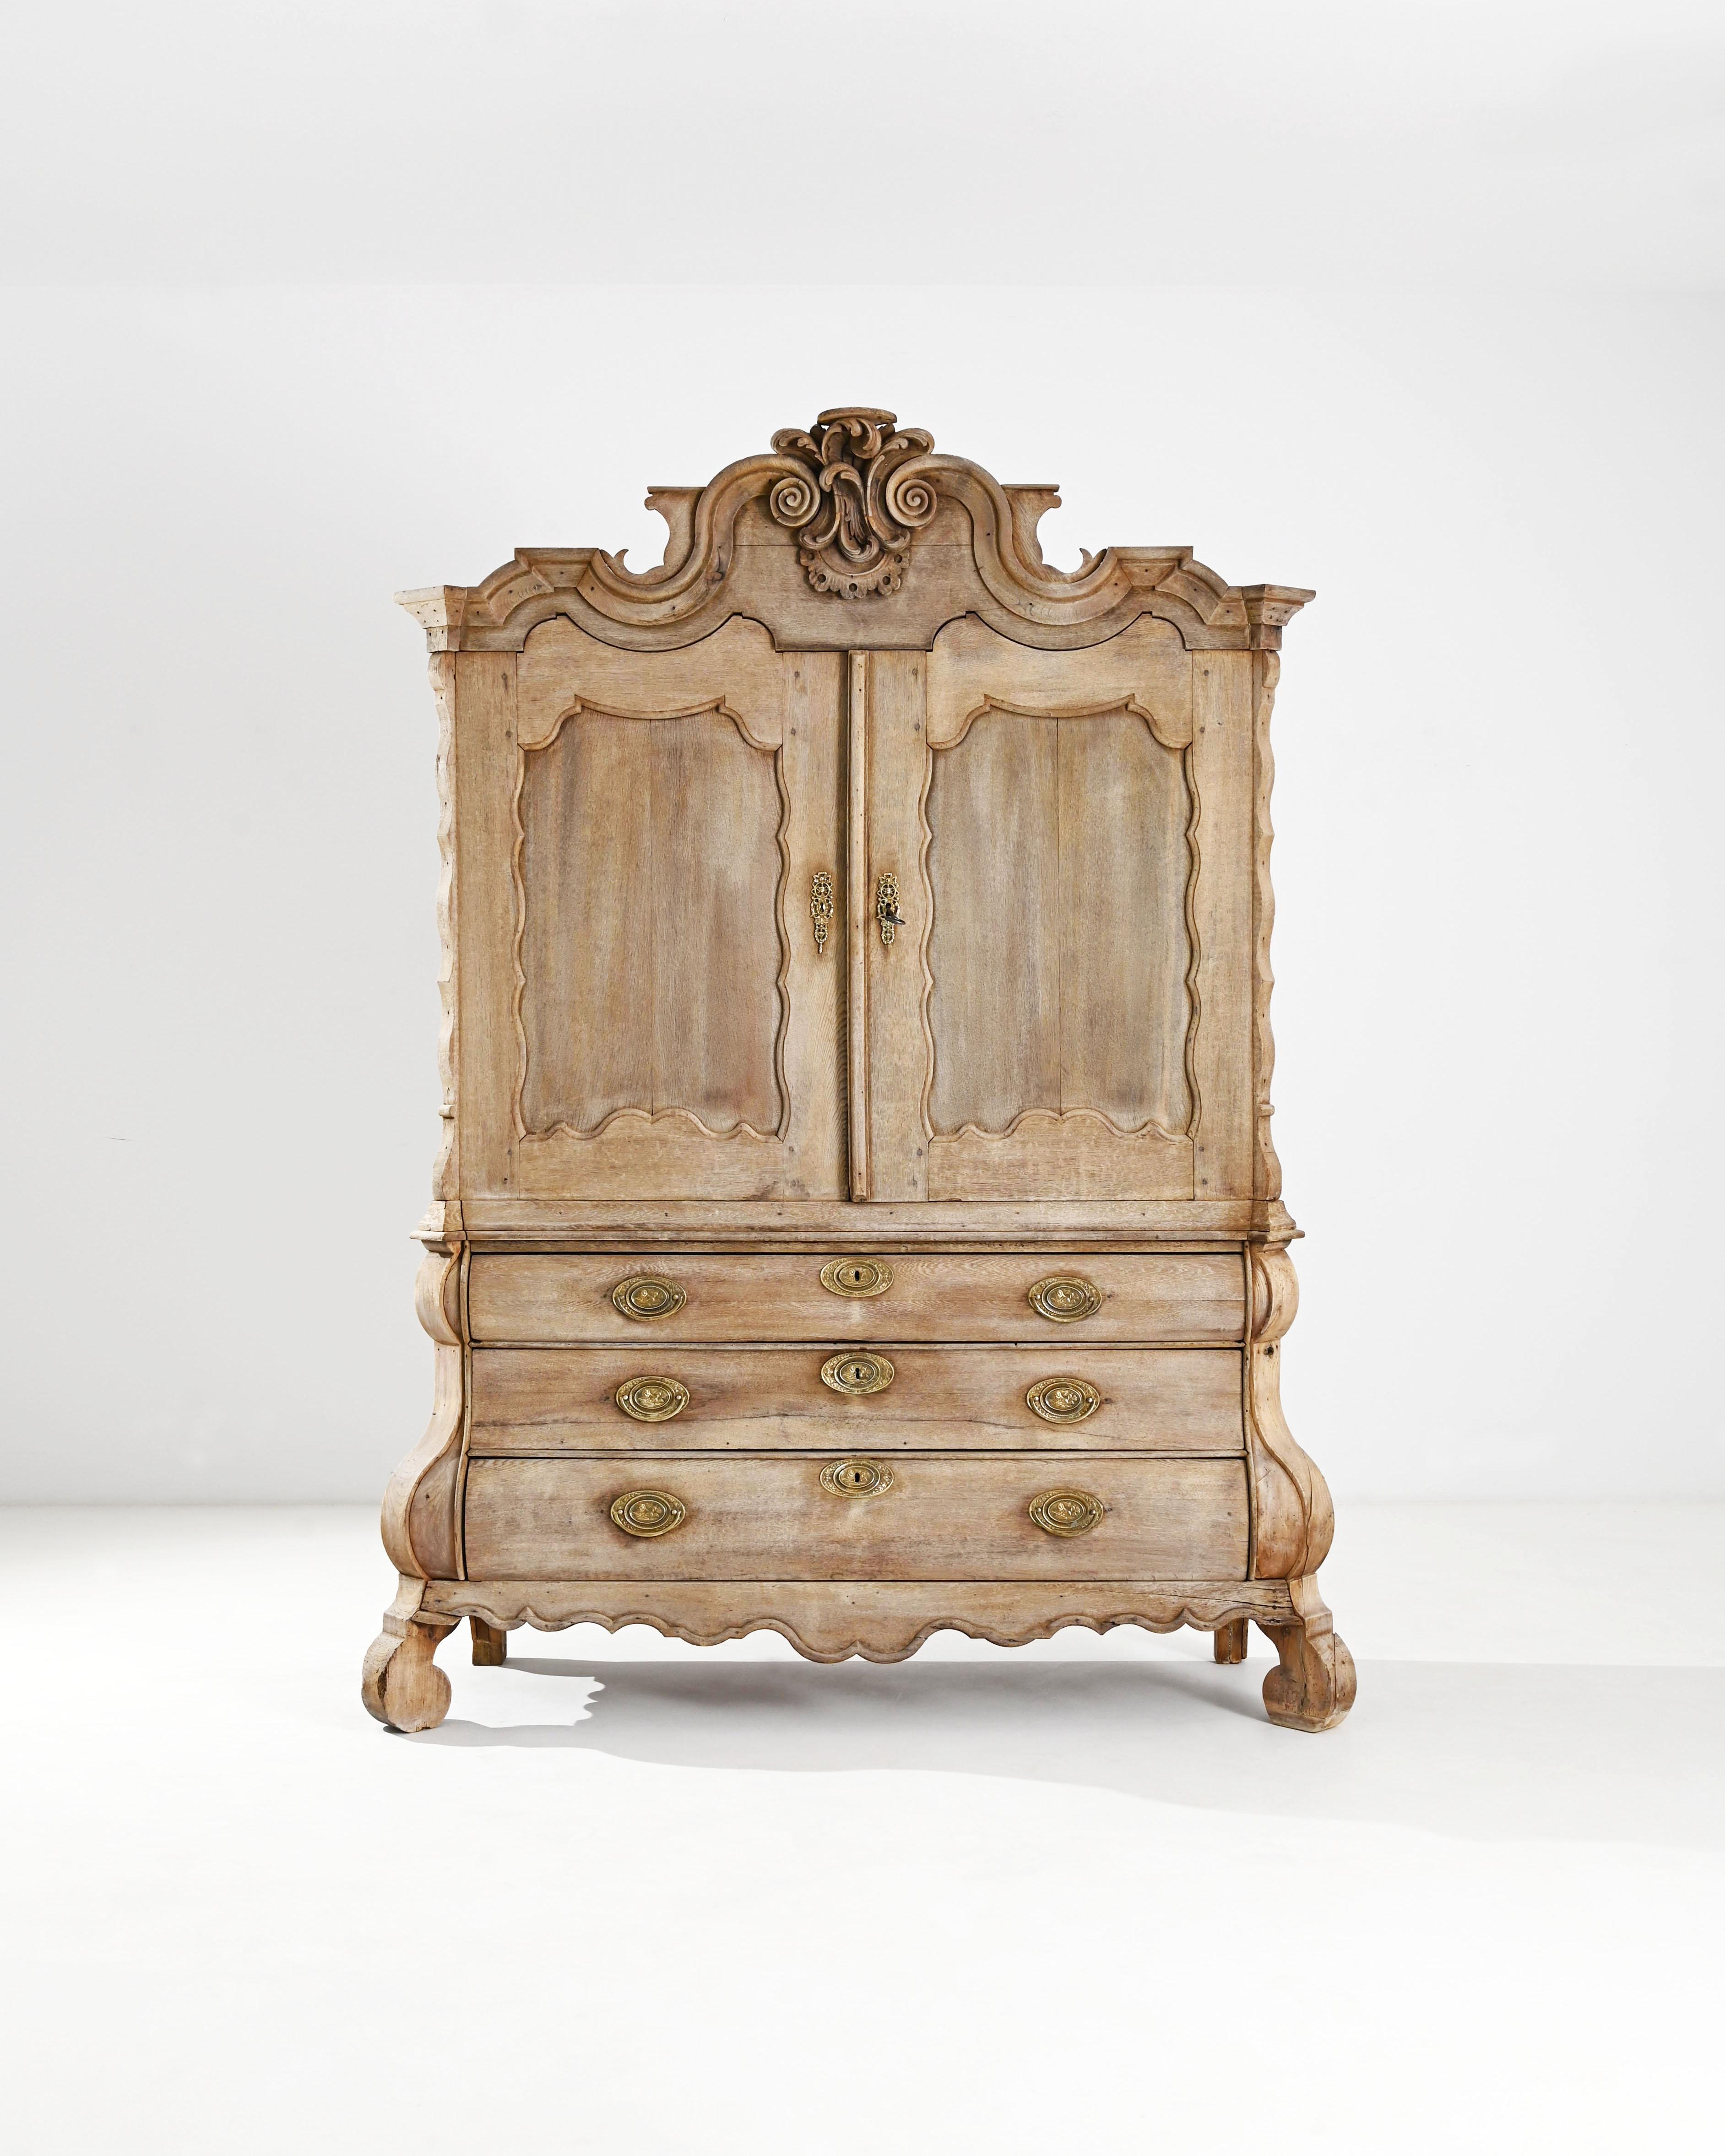 A magnificent baroque cabinet in natural oak. Made in the Netherlands circa 1800, the exemplary cabinetry on display here is a testament to the carpenter’s skill. Eschewing straight lines, the design uses S-shaped curves to create a sense of volume